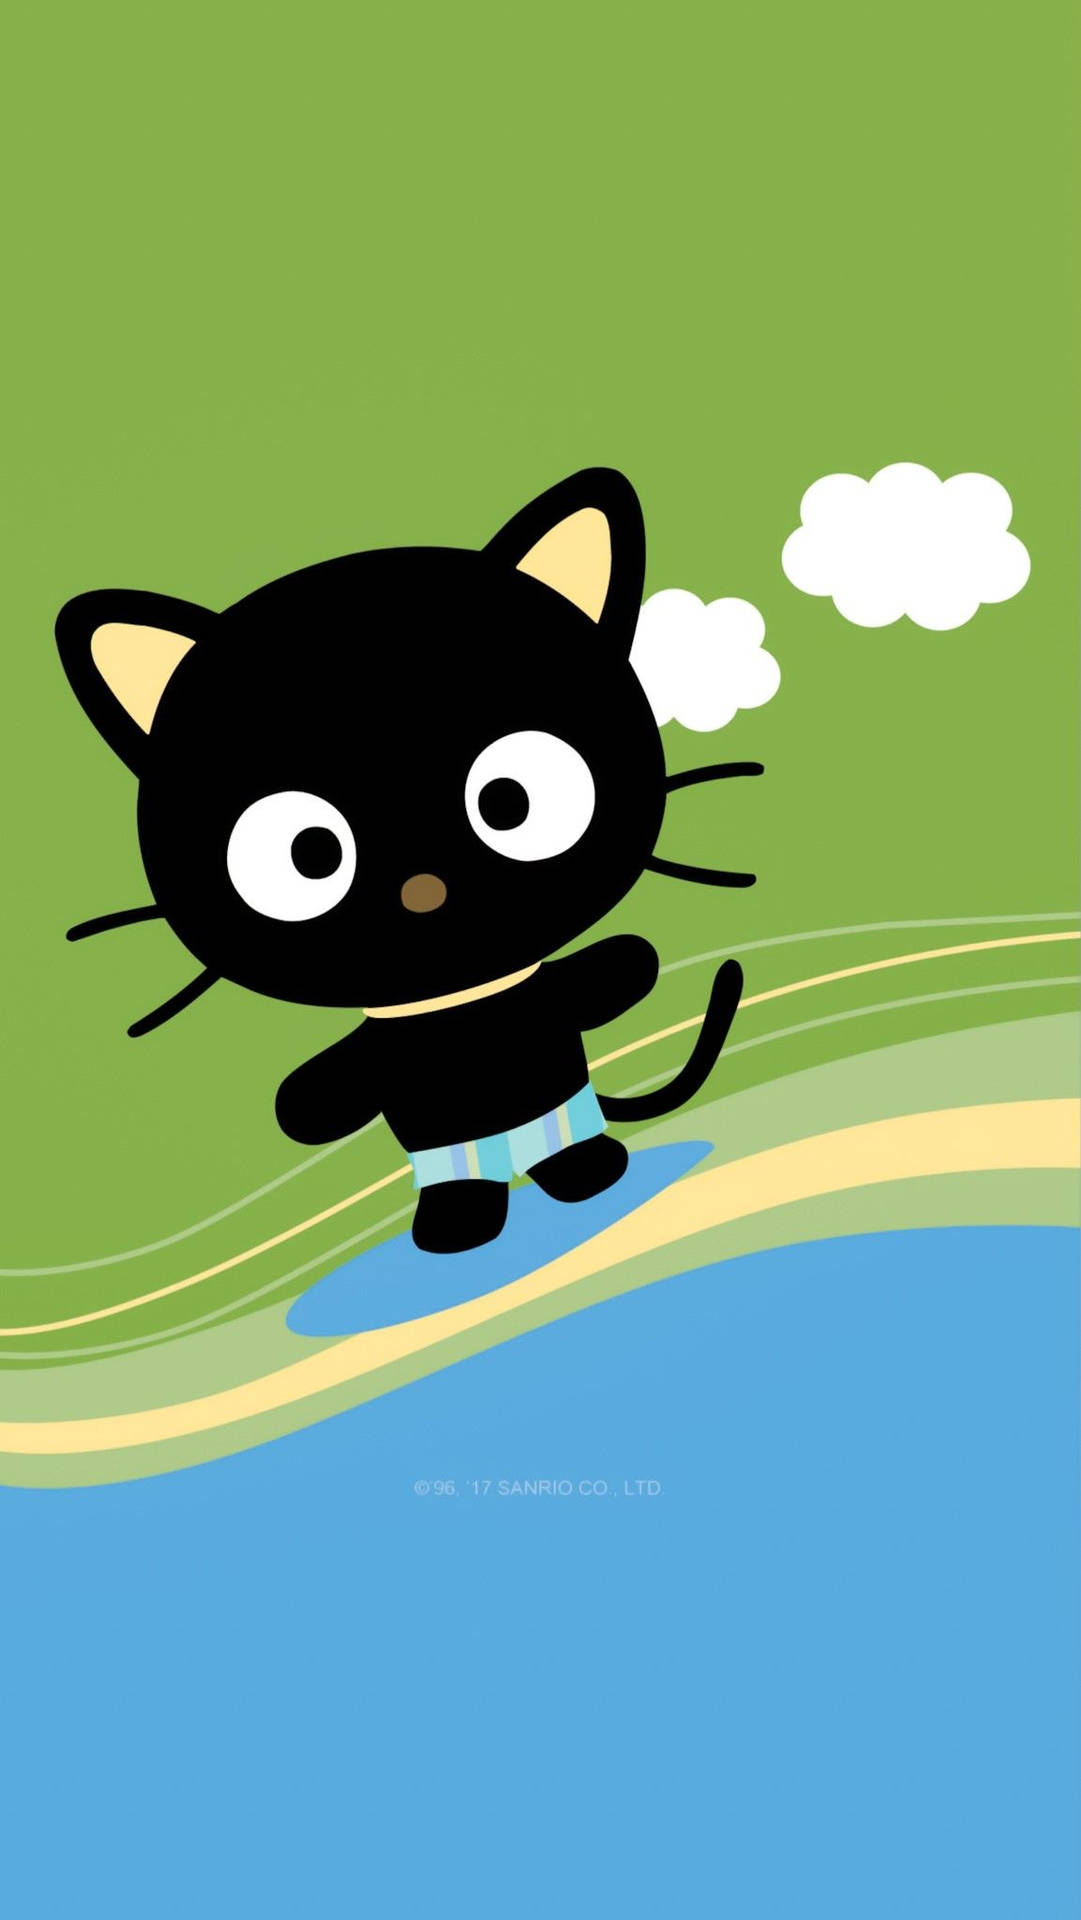 "Chococat Surfing the Waves" Wallpaper